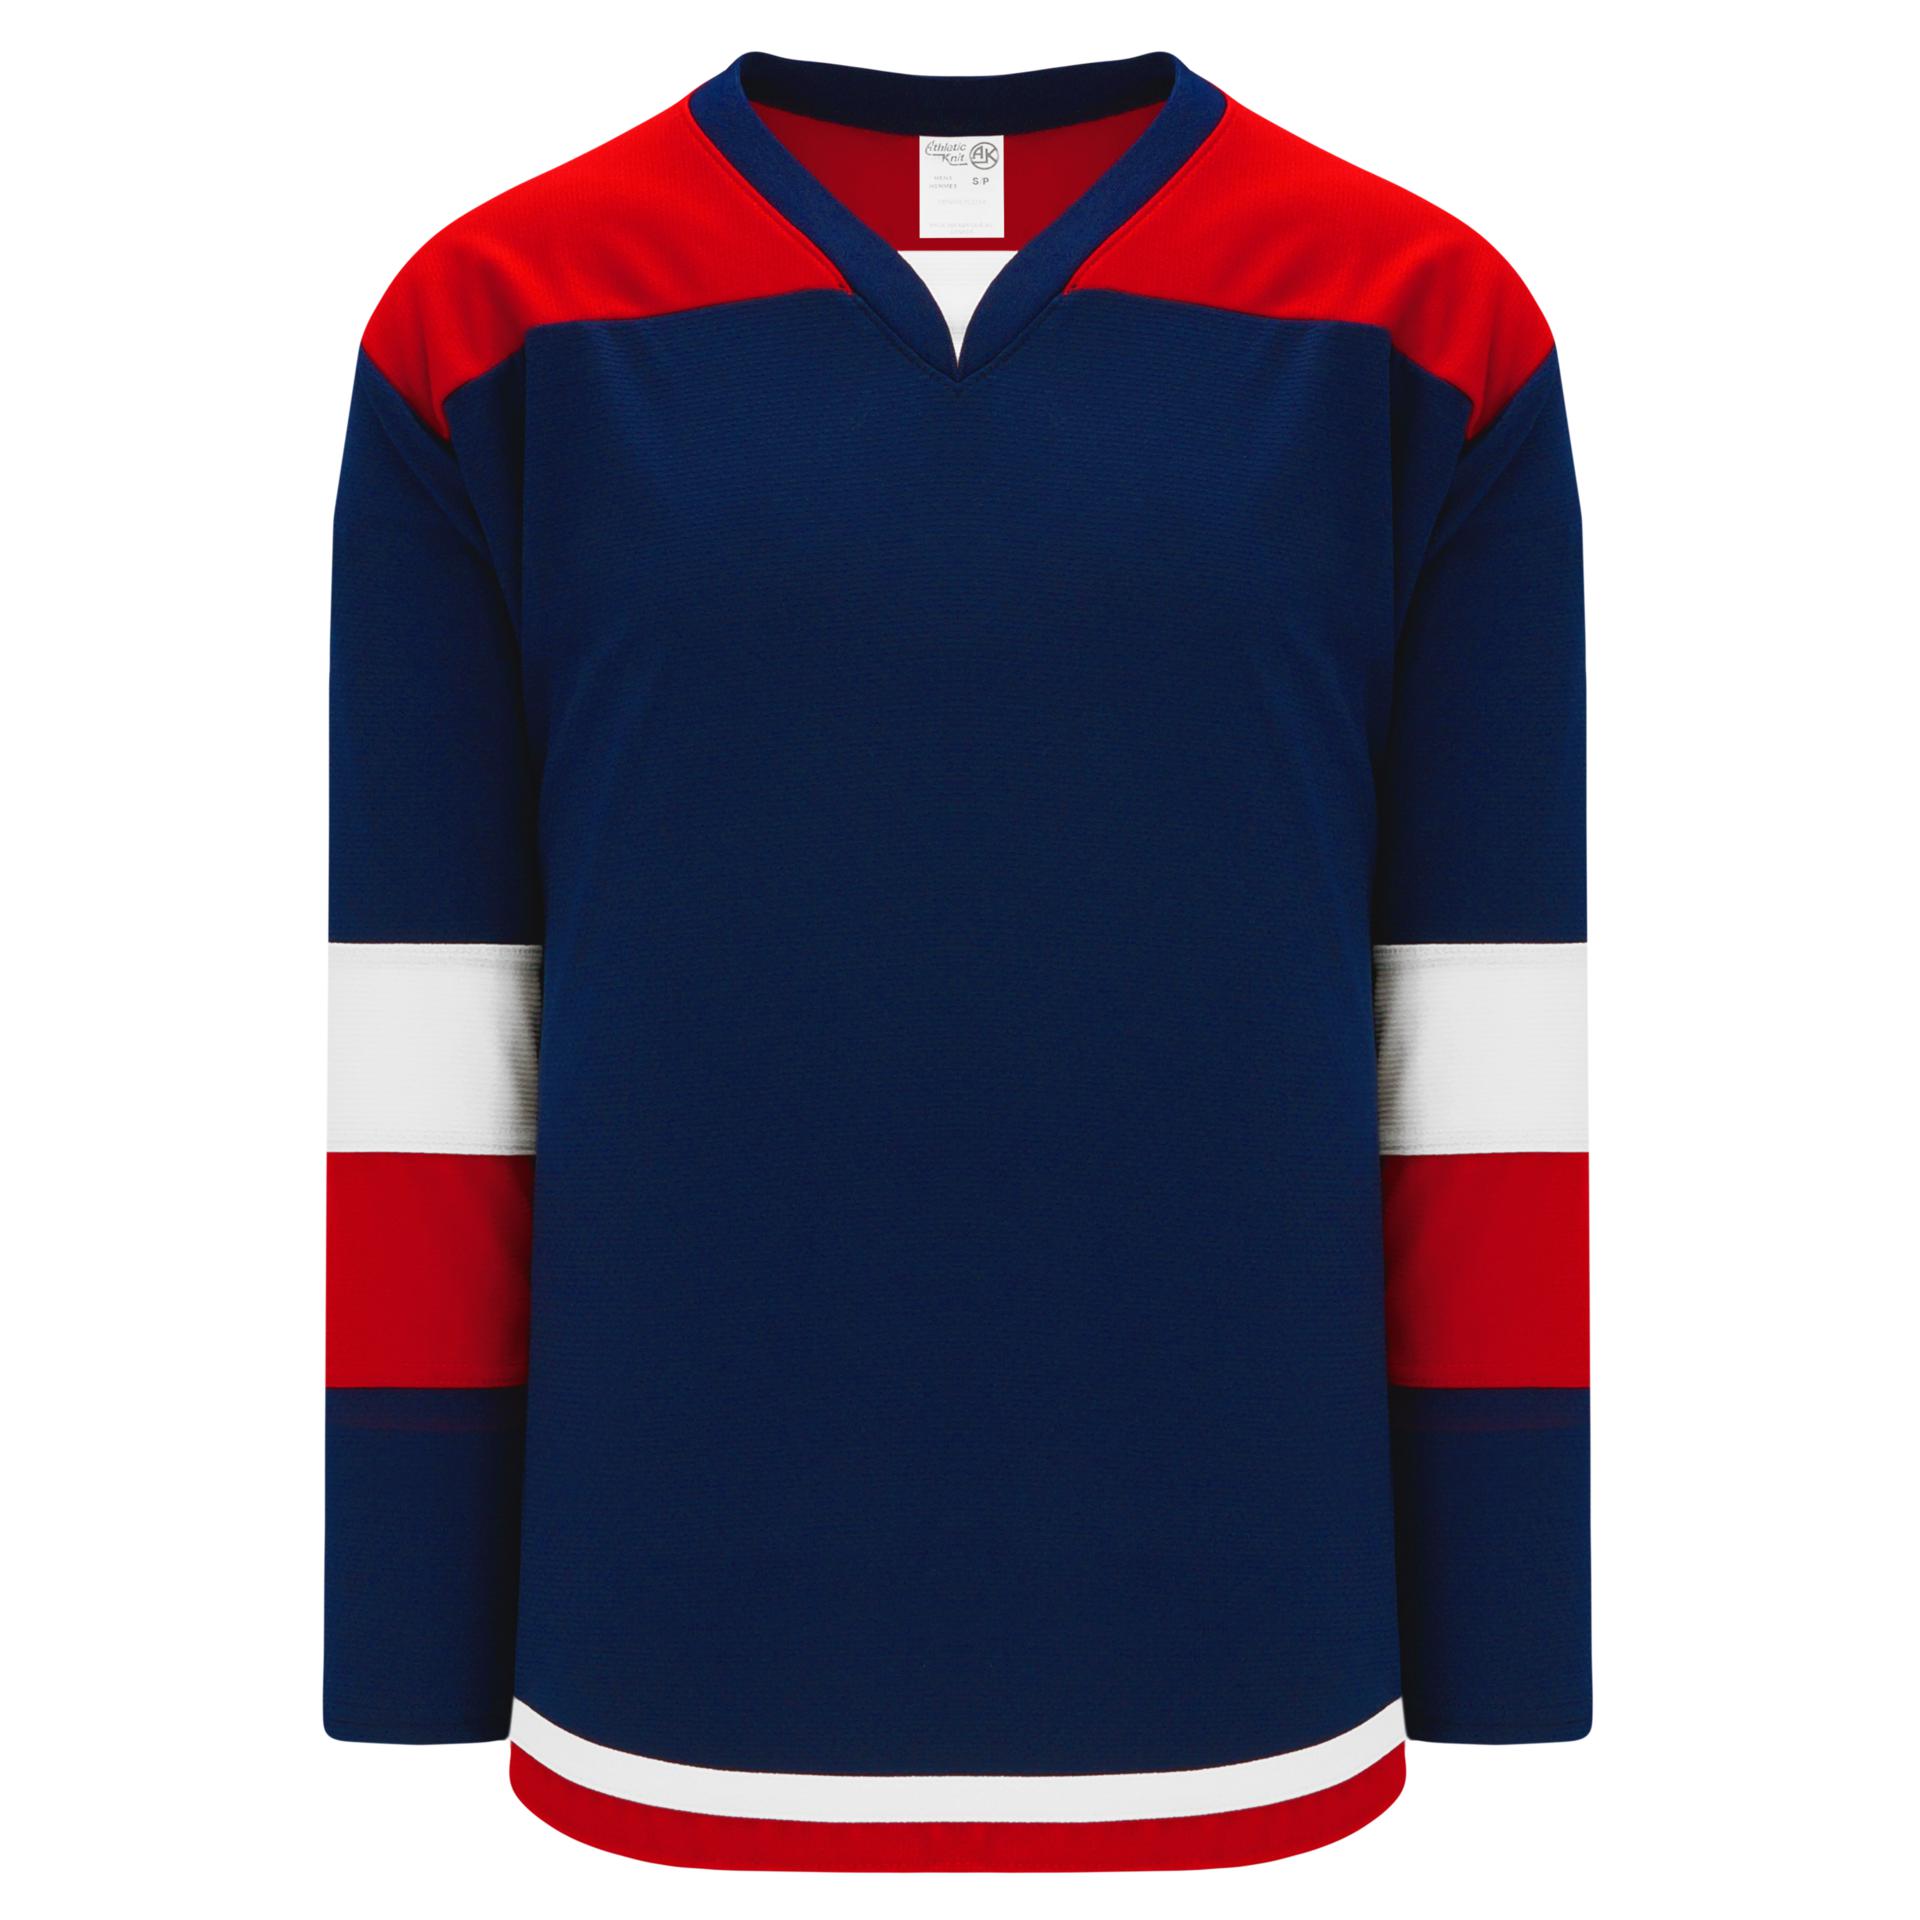 A Blank Blue Hockey Jersey Has Red And White Stripes Stock Illustration -  Download Image Now - iStock